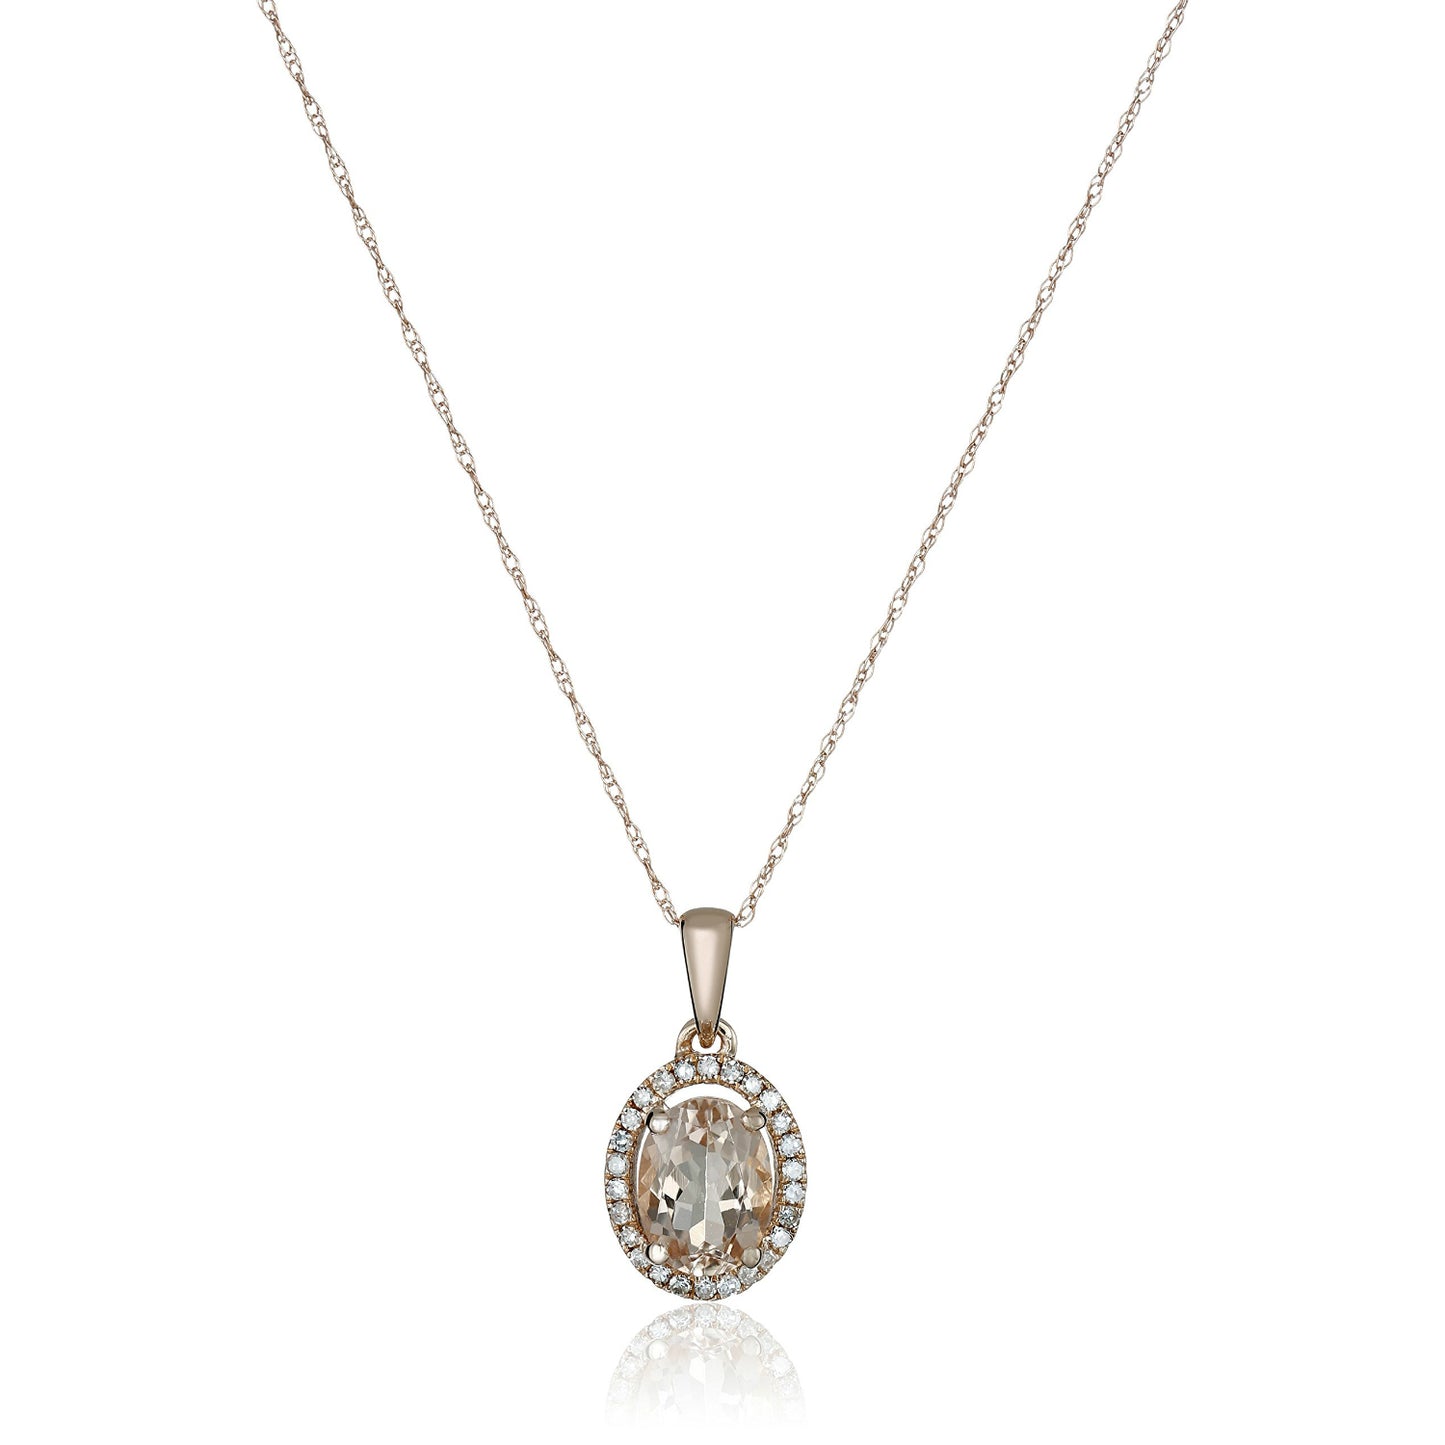 10k Rose Gold Morganite and Diamond Princess Diana Oval Halo Pendant Necklace (1/10cttw, H-I Color, I1-I2 Clarity), 18" - Pinctore